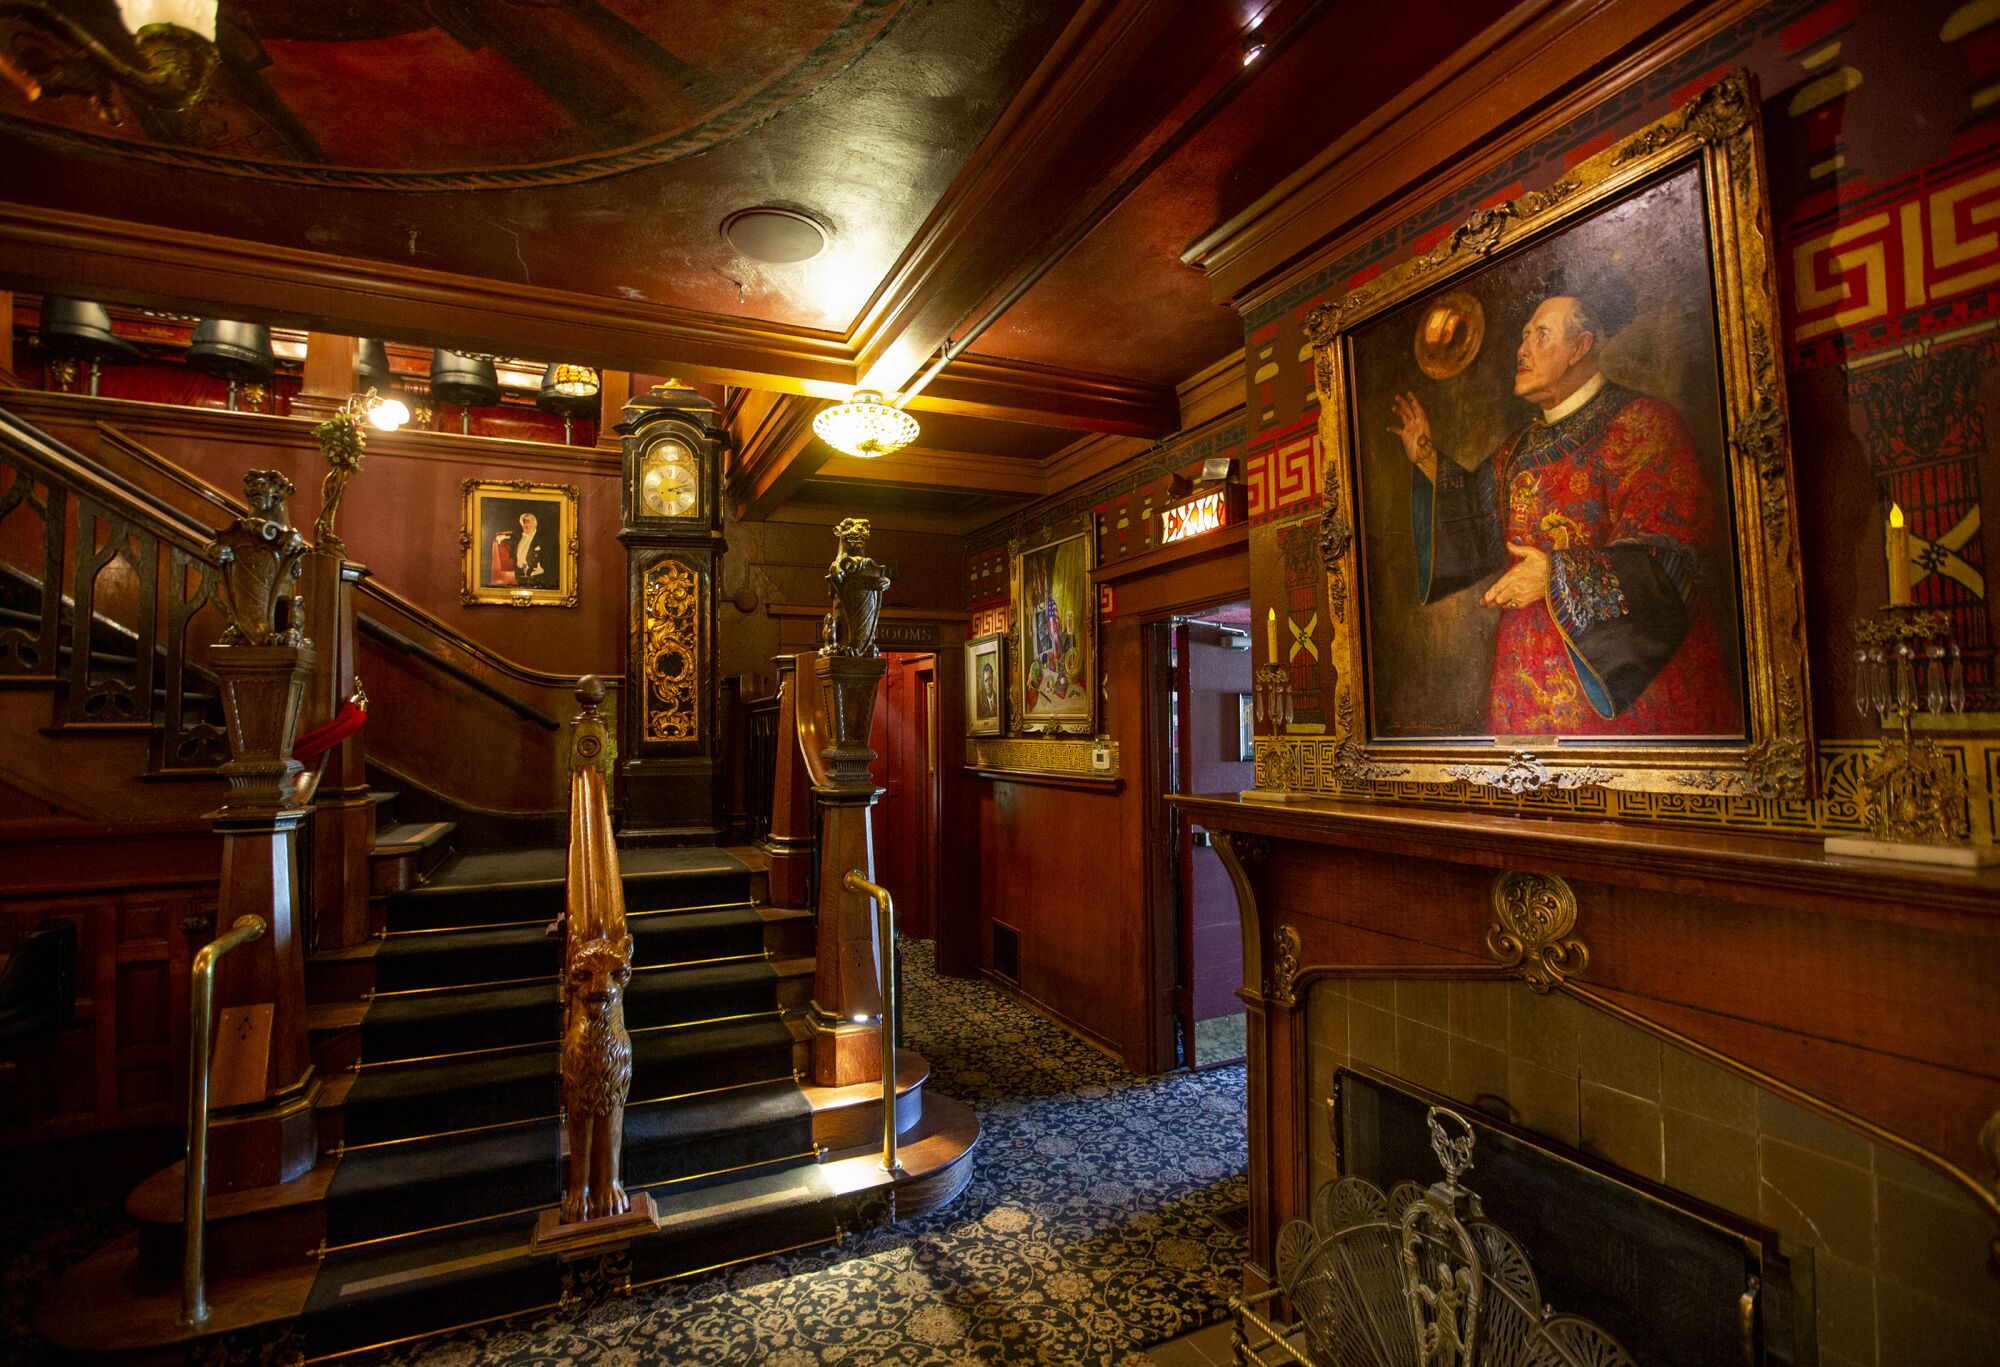  Interior of the Magic Castle in Hollywood.